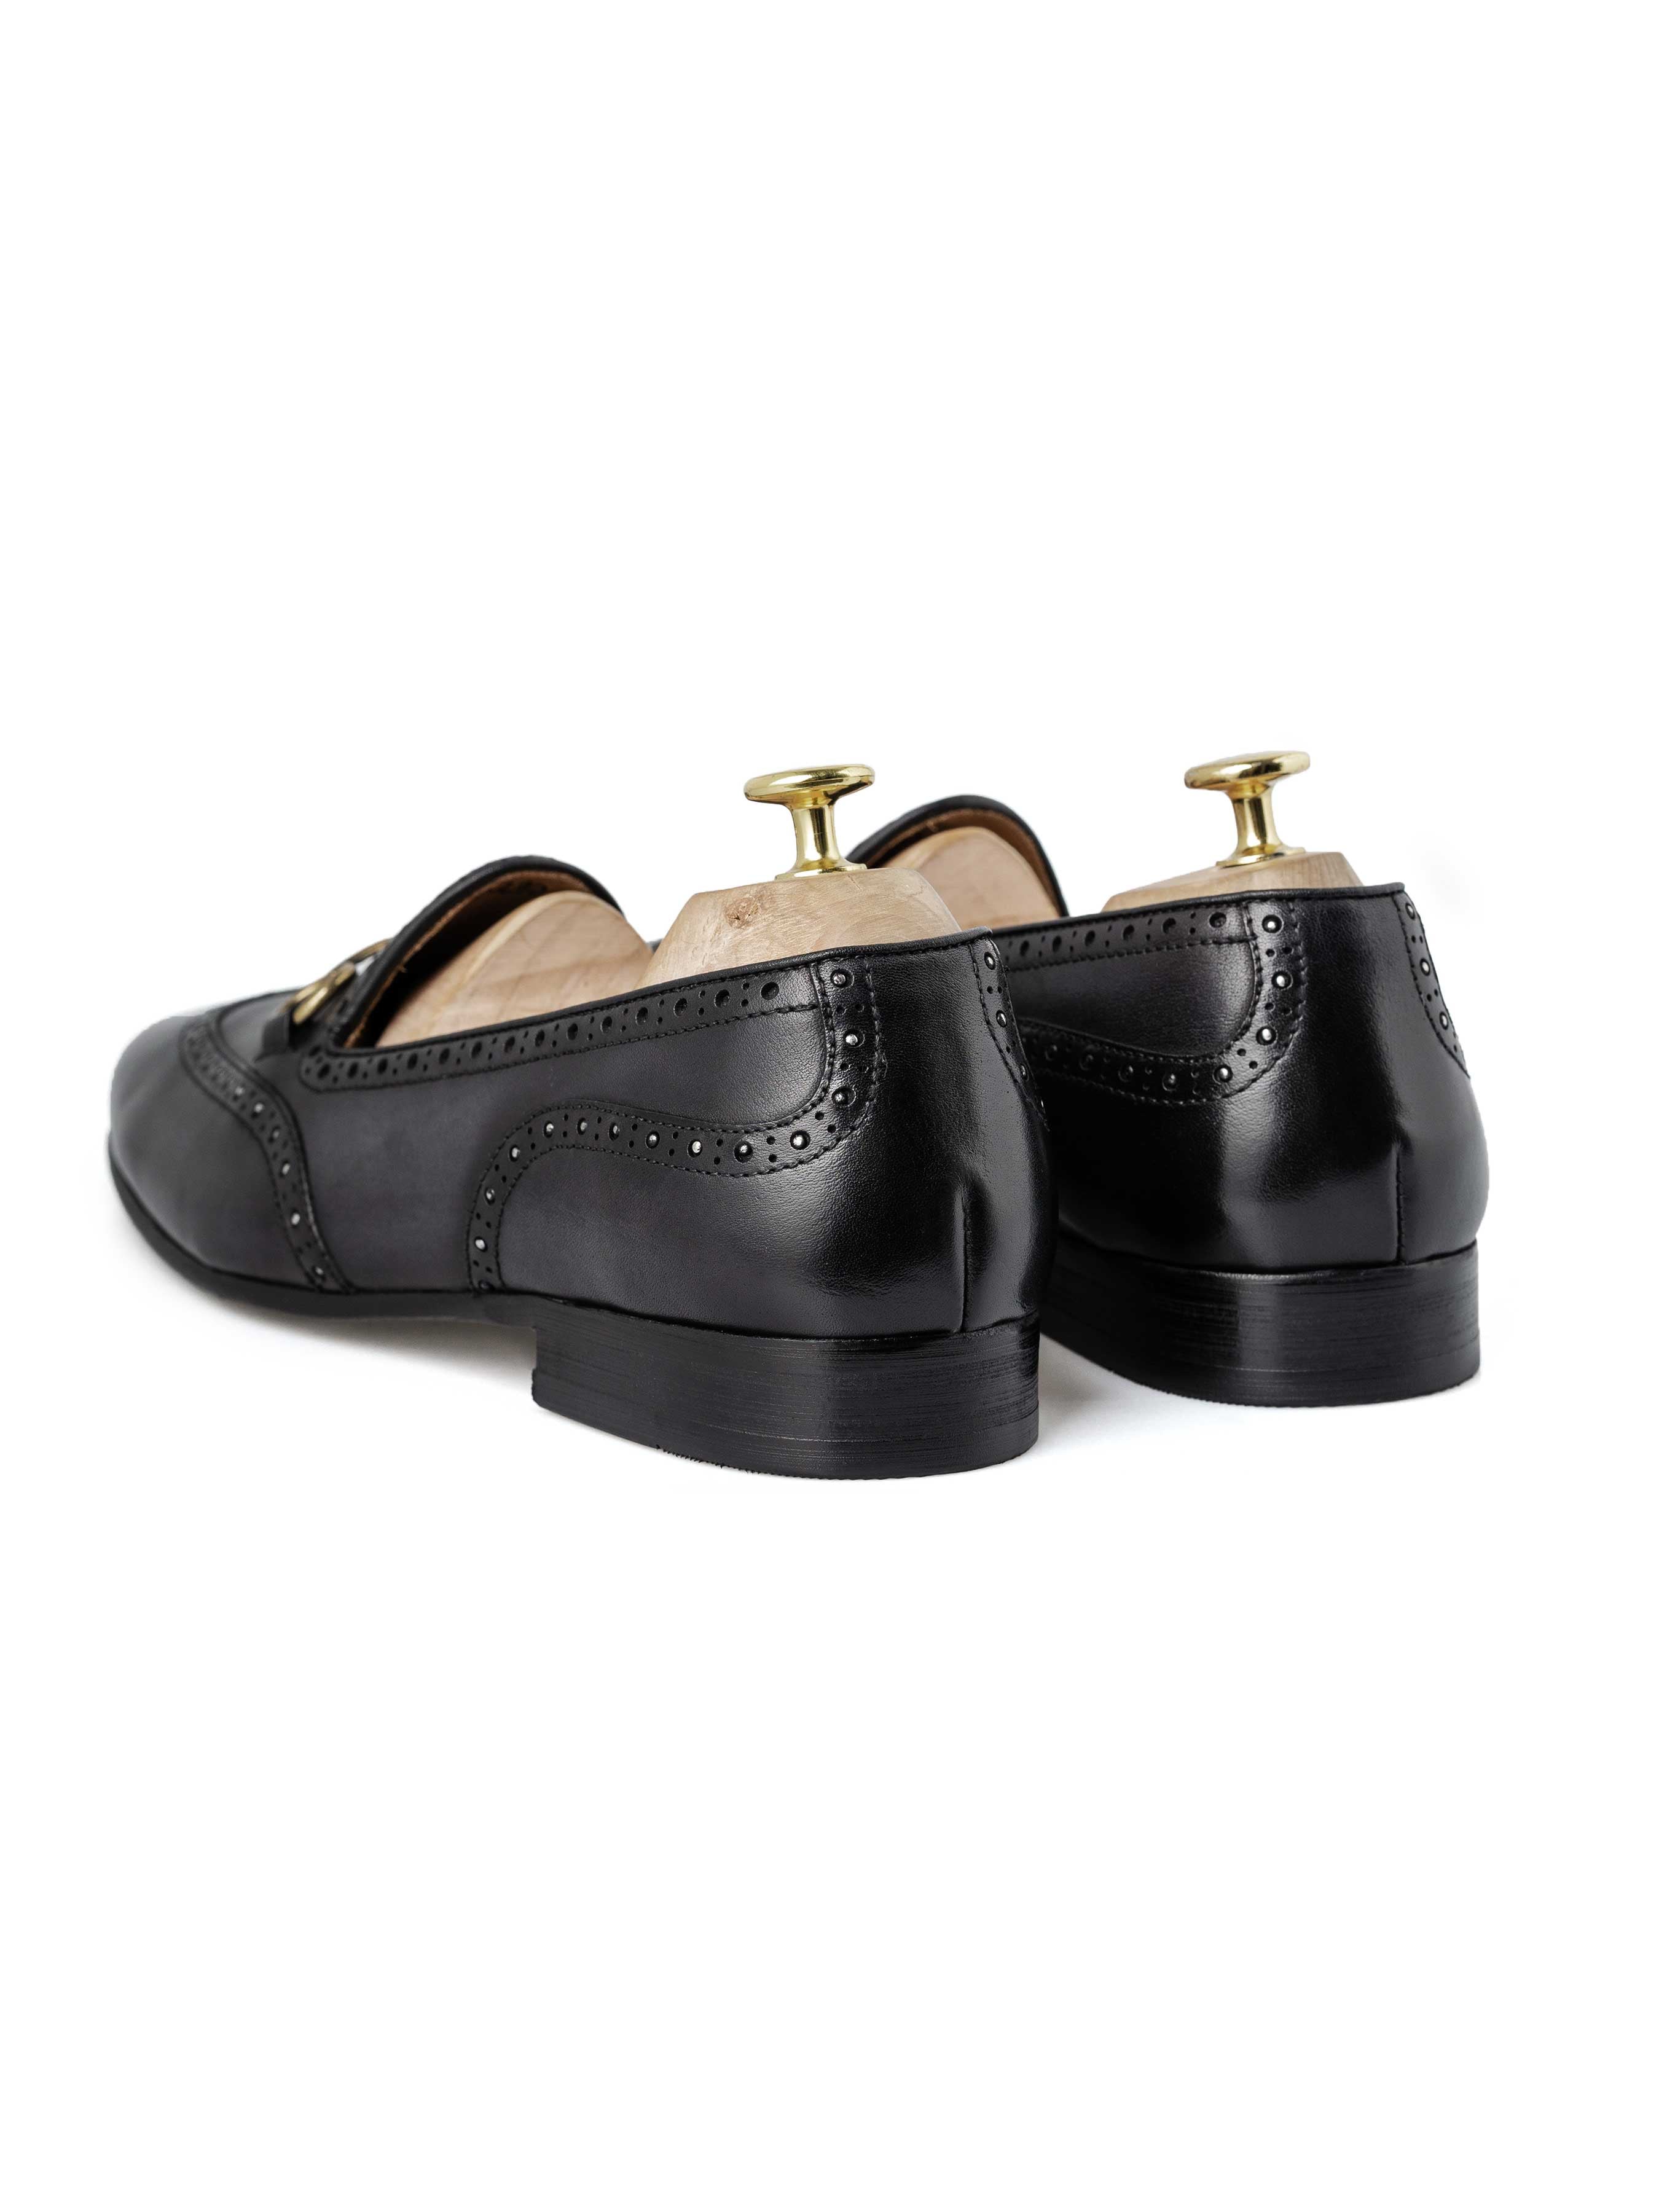 Belgian Loafer Horsebit Buckle - Black Grey with Studded Wingtip (Hand Painted Patina) - Zeve Shoes